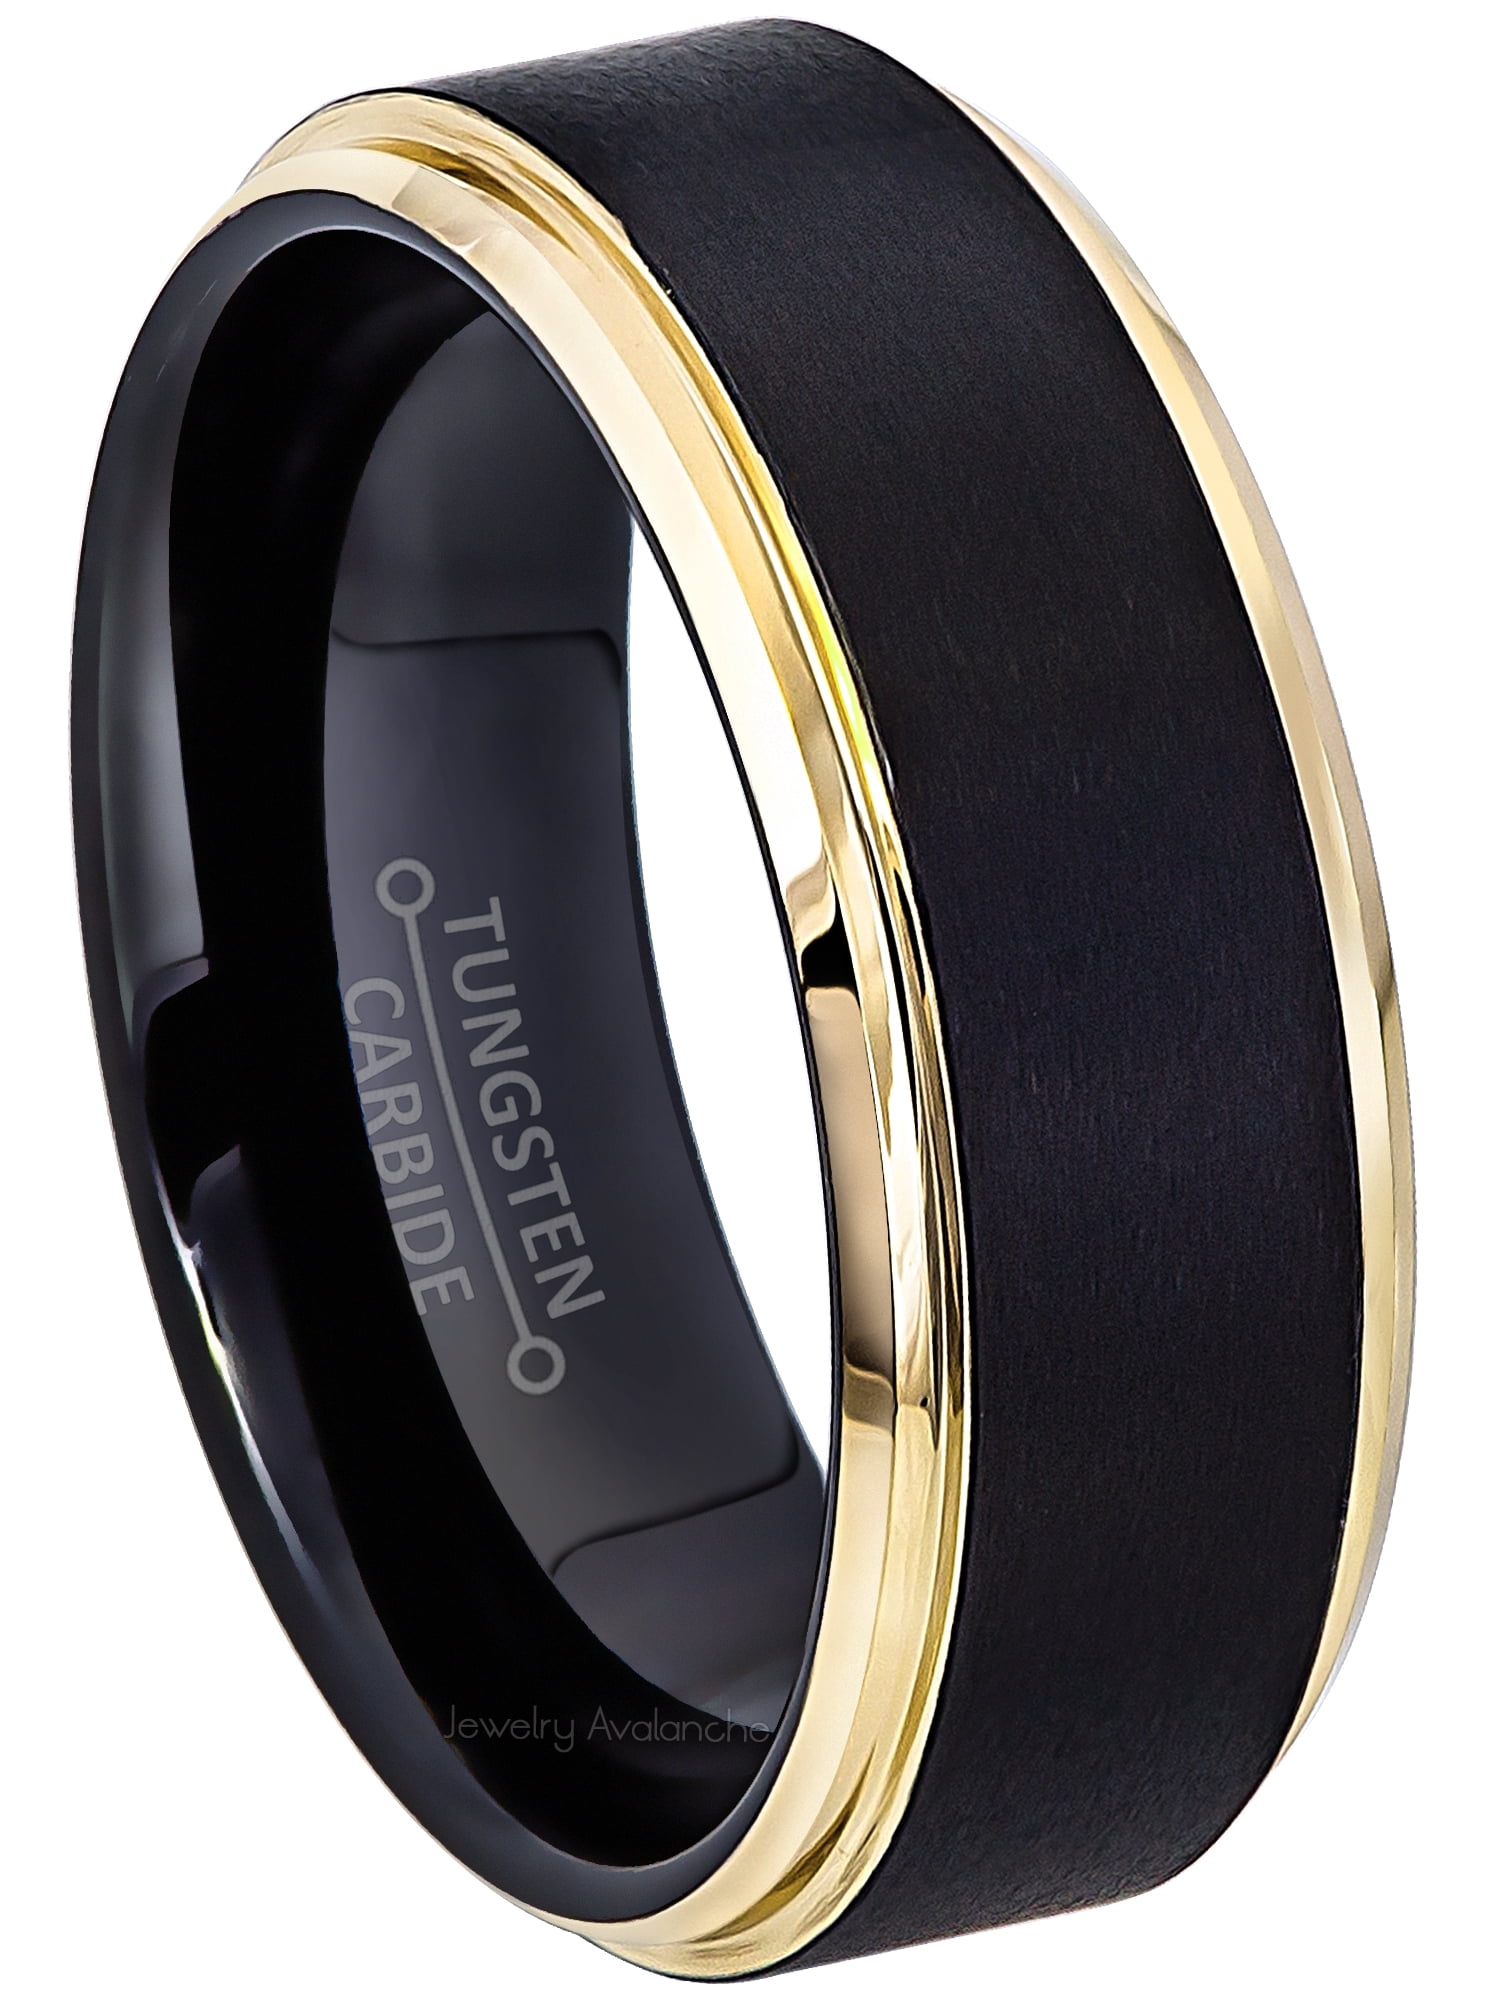 Men's Wedding Ring|Yellow Gold Tungsten Wedding Band|Tungsten Carbide Ring|anniversary Ring|Unique Black Ring|18k Yellow Gold|Comfort Fit